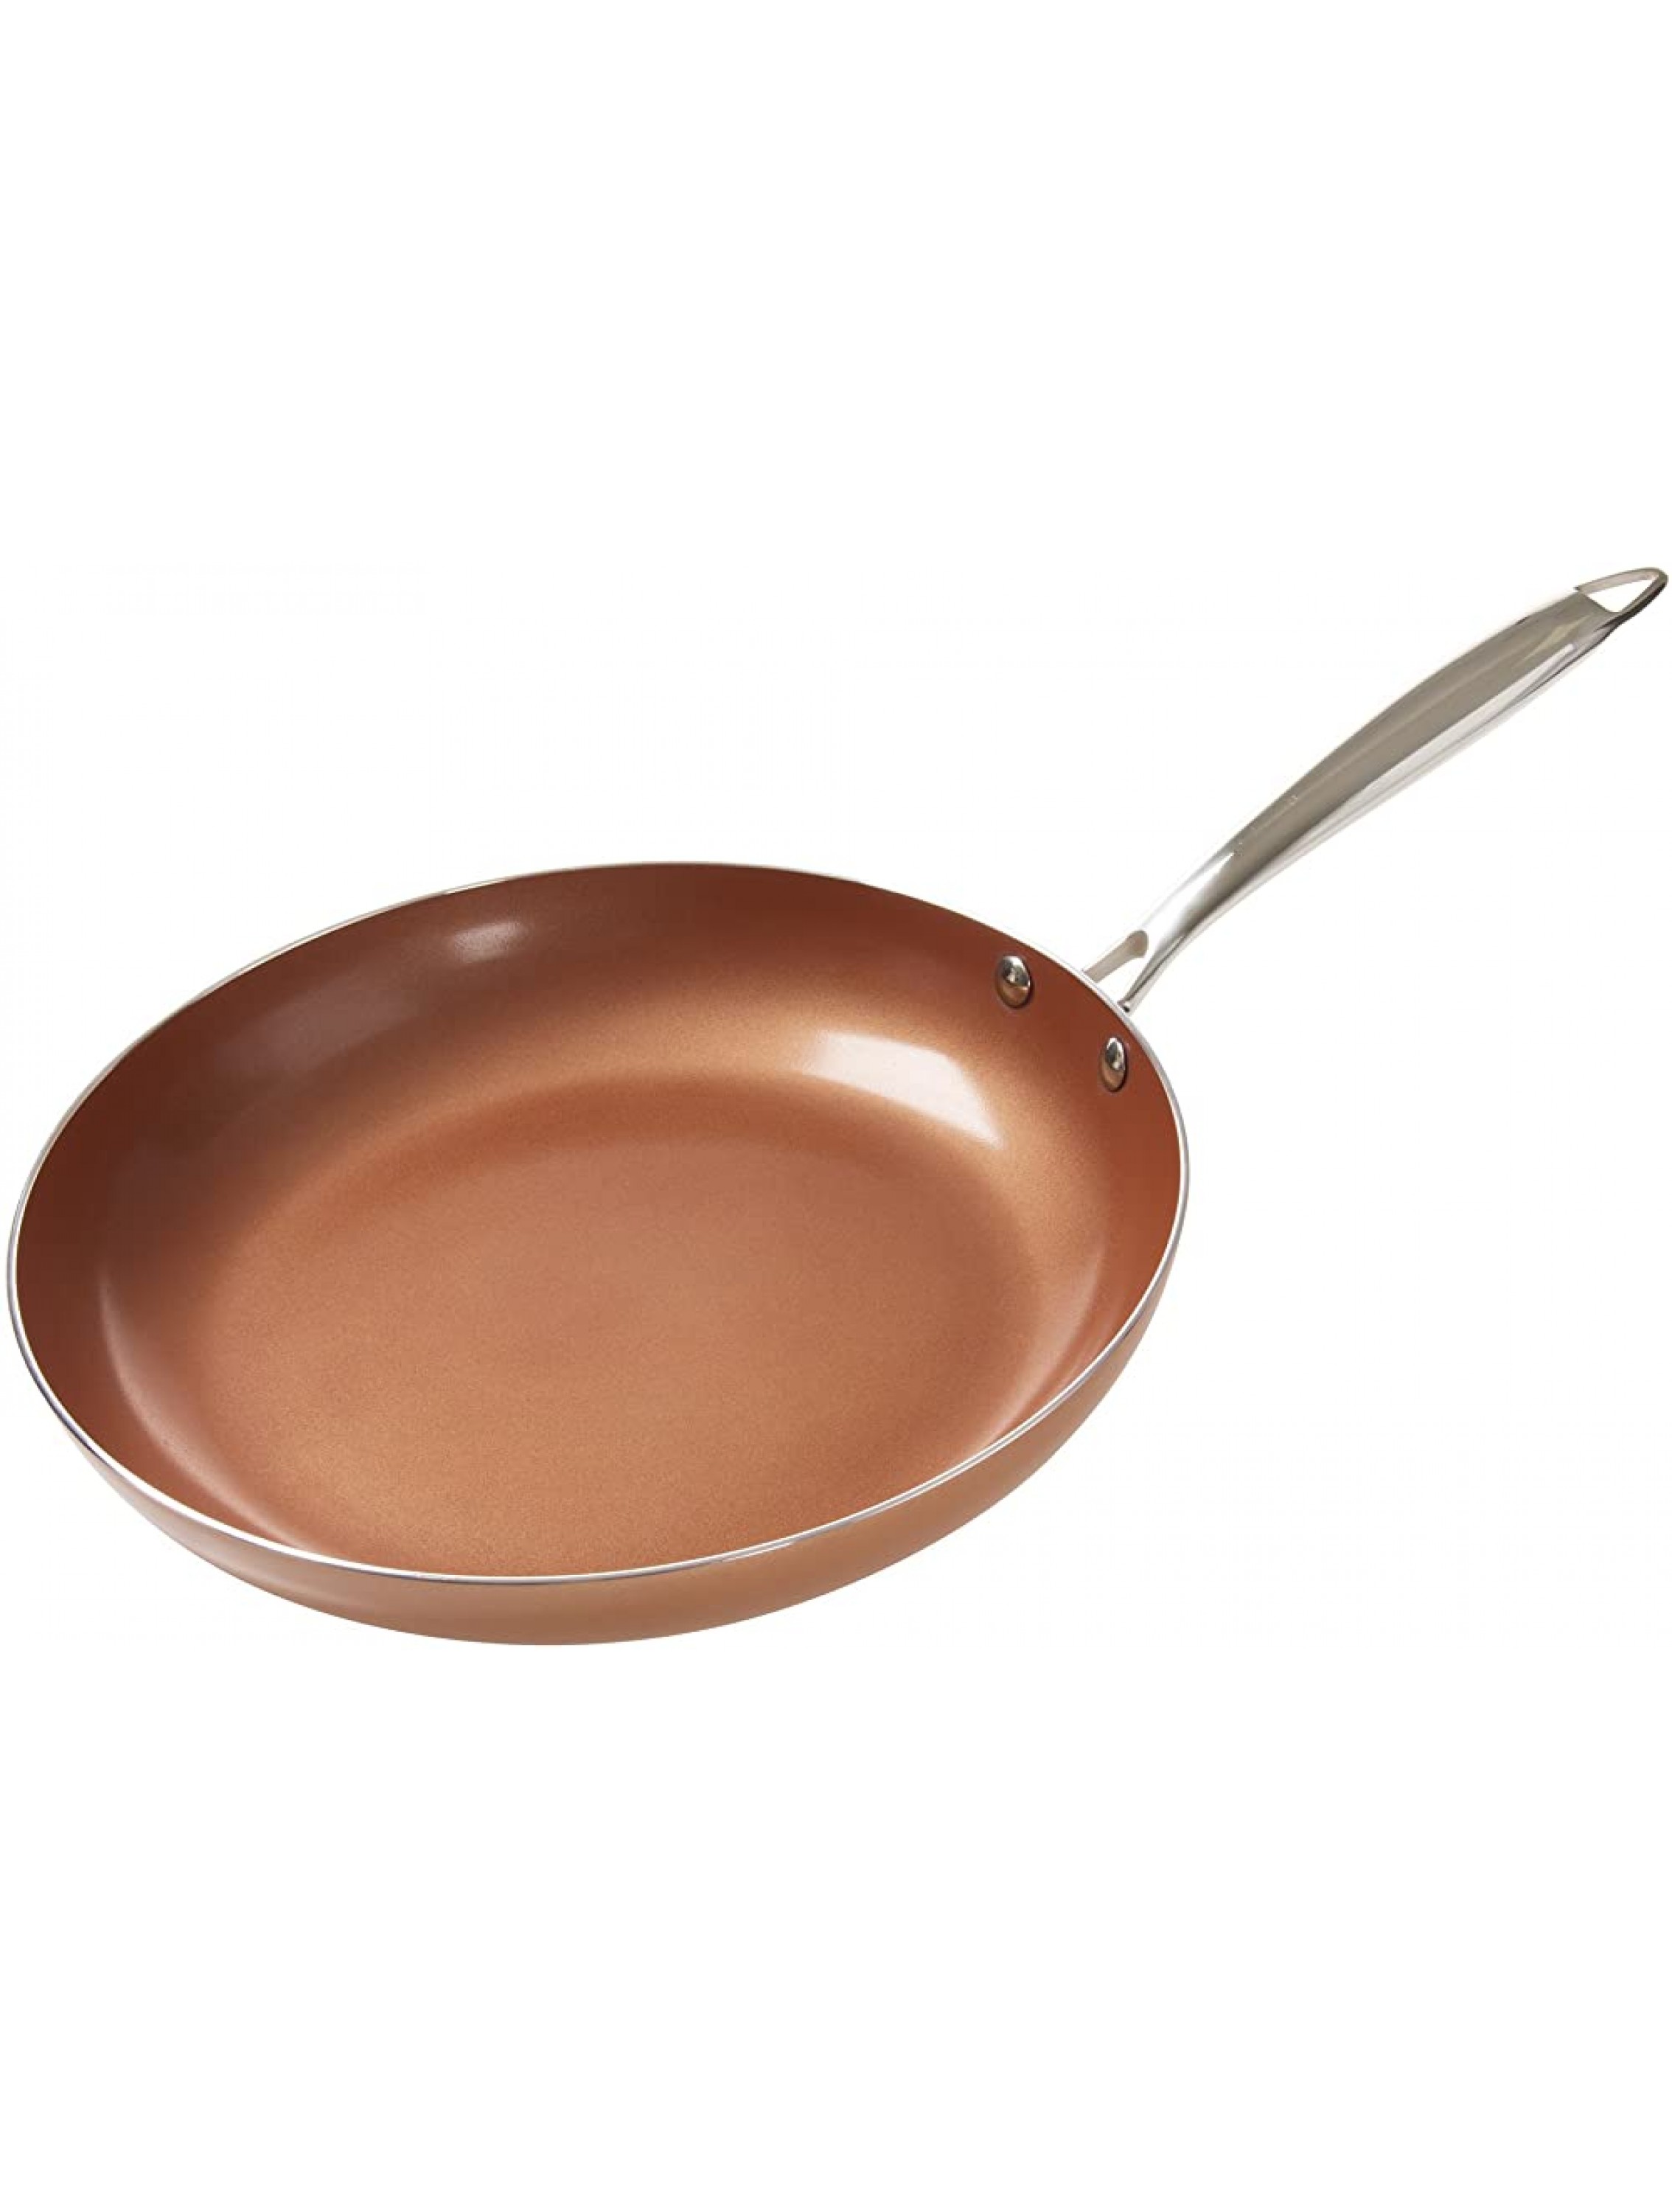 12 inch Double Layer Non-stick Frying Pan with Copper Colored Finish-Saute Omelet Skillet Dishwasher Safe Allumi-shield Cookware by Classic Cuisine - B0WKM6P4L